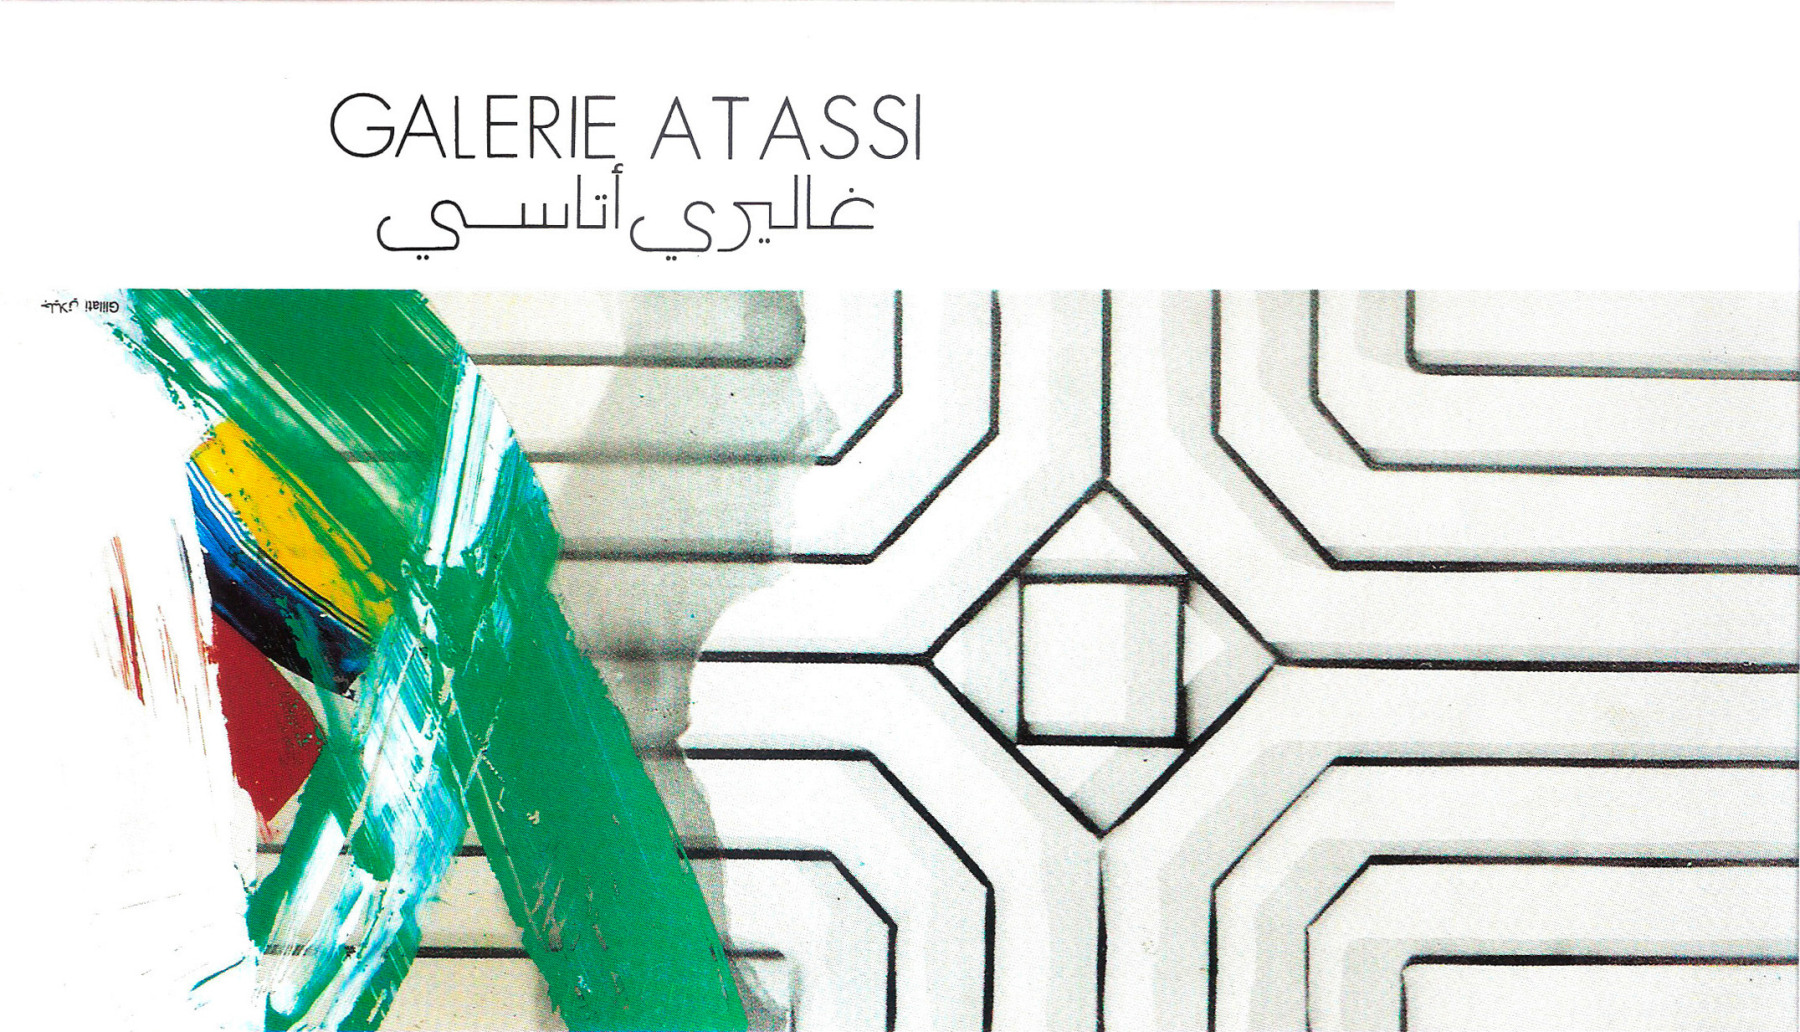 The Archives of Atassi Gallery - MASA Collections - Atassi Foundation